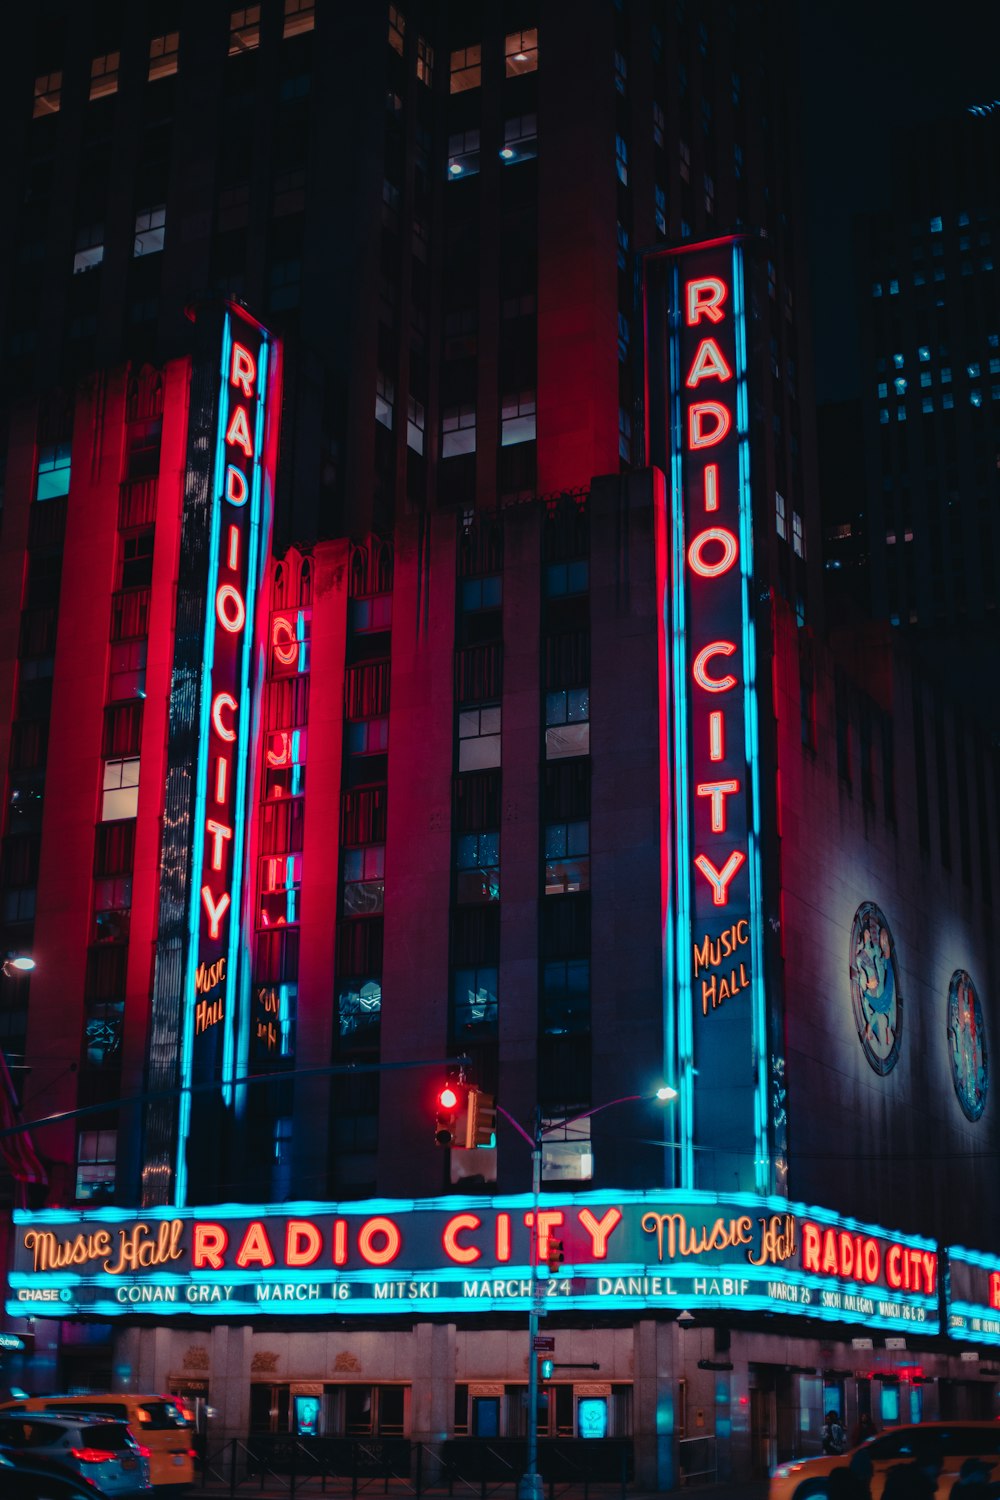 the radio city theater is lit up at night